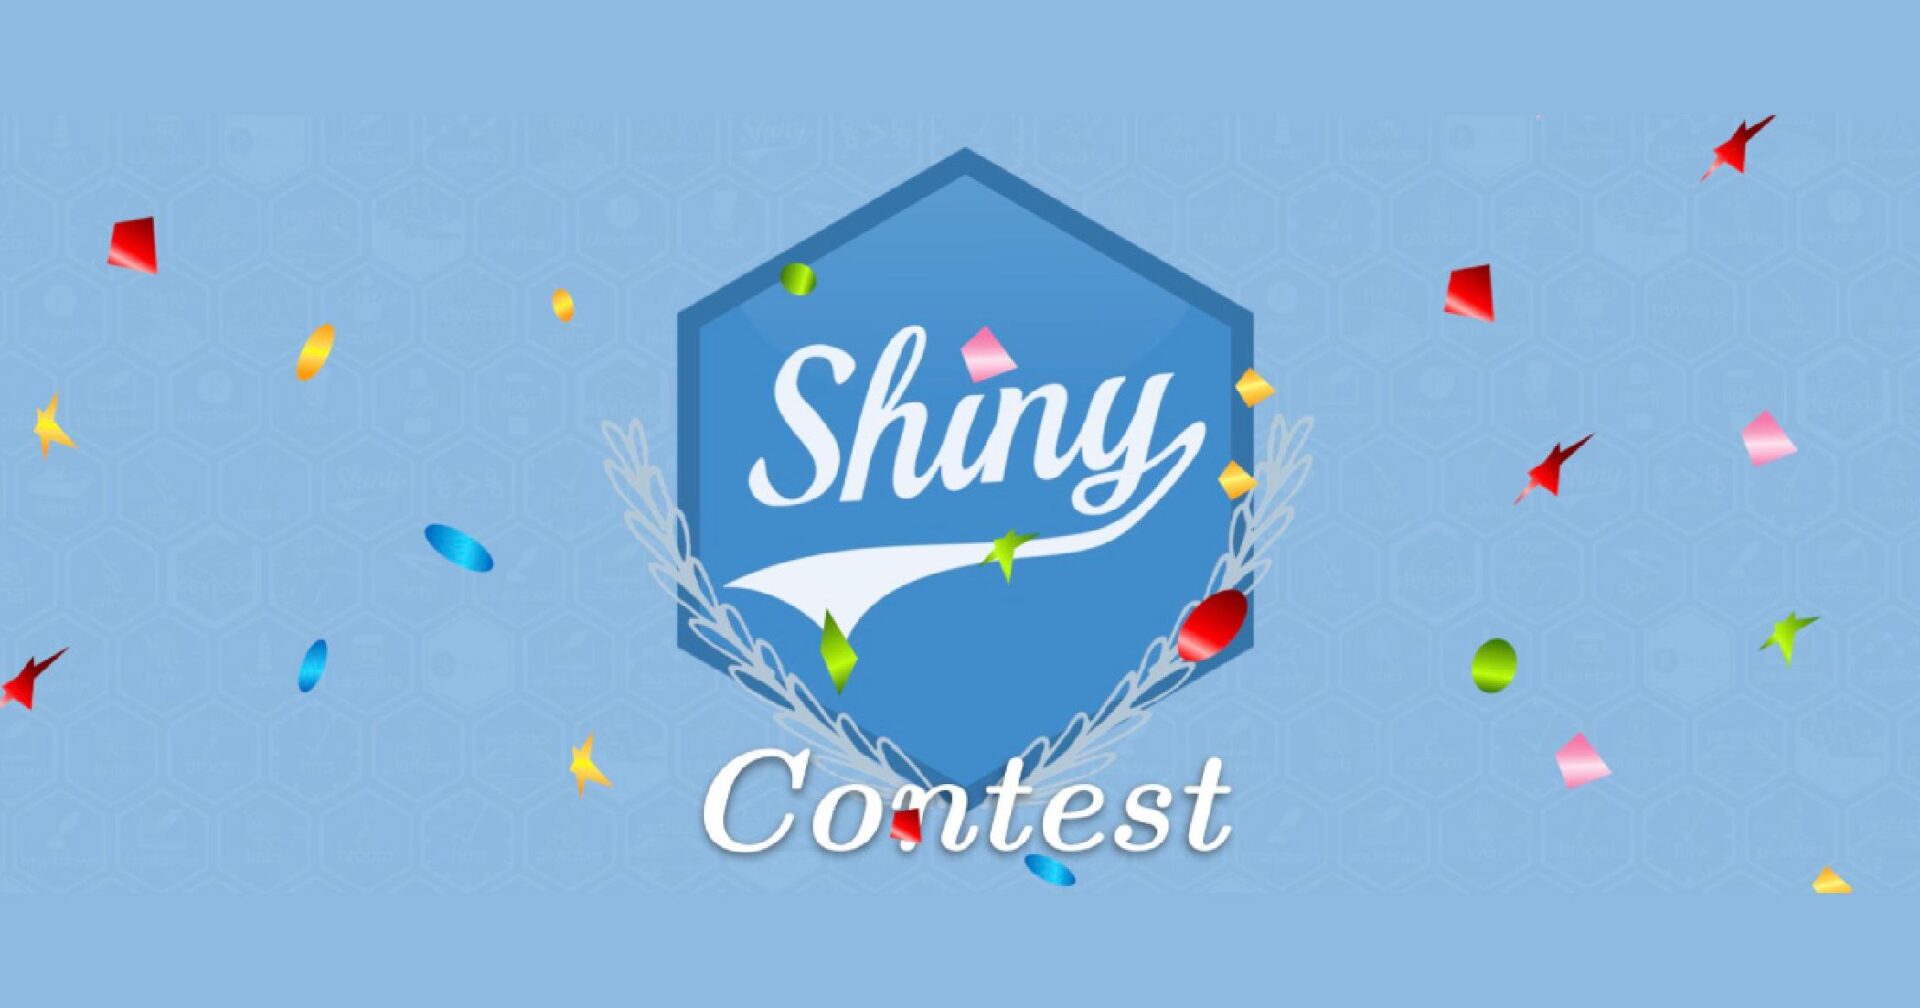 Text: Shiny Contest. The Shiny hex sticker with confetti falling around it.